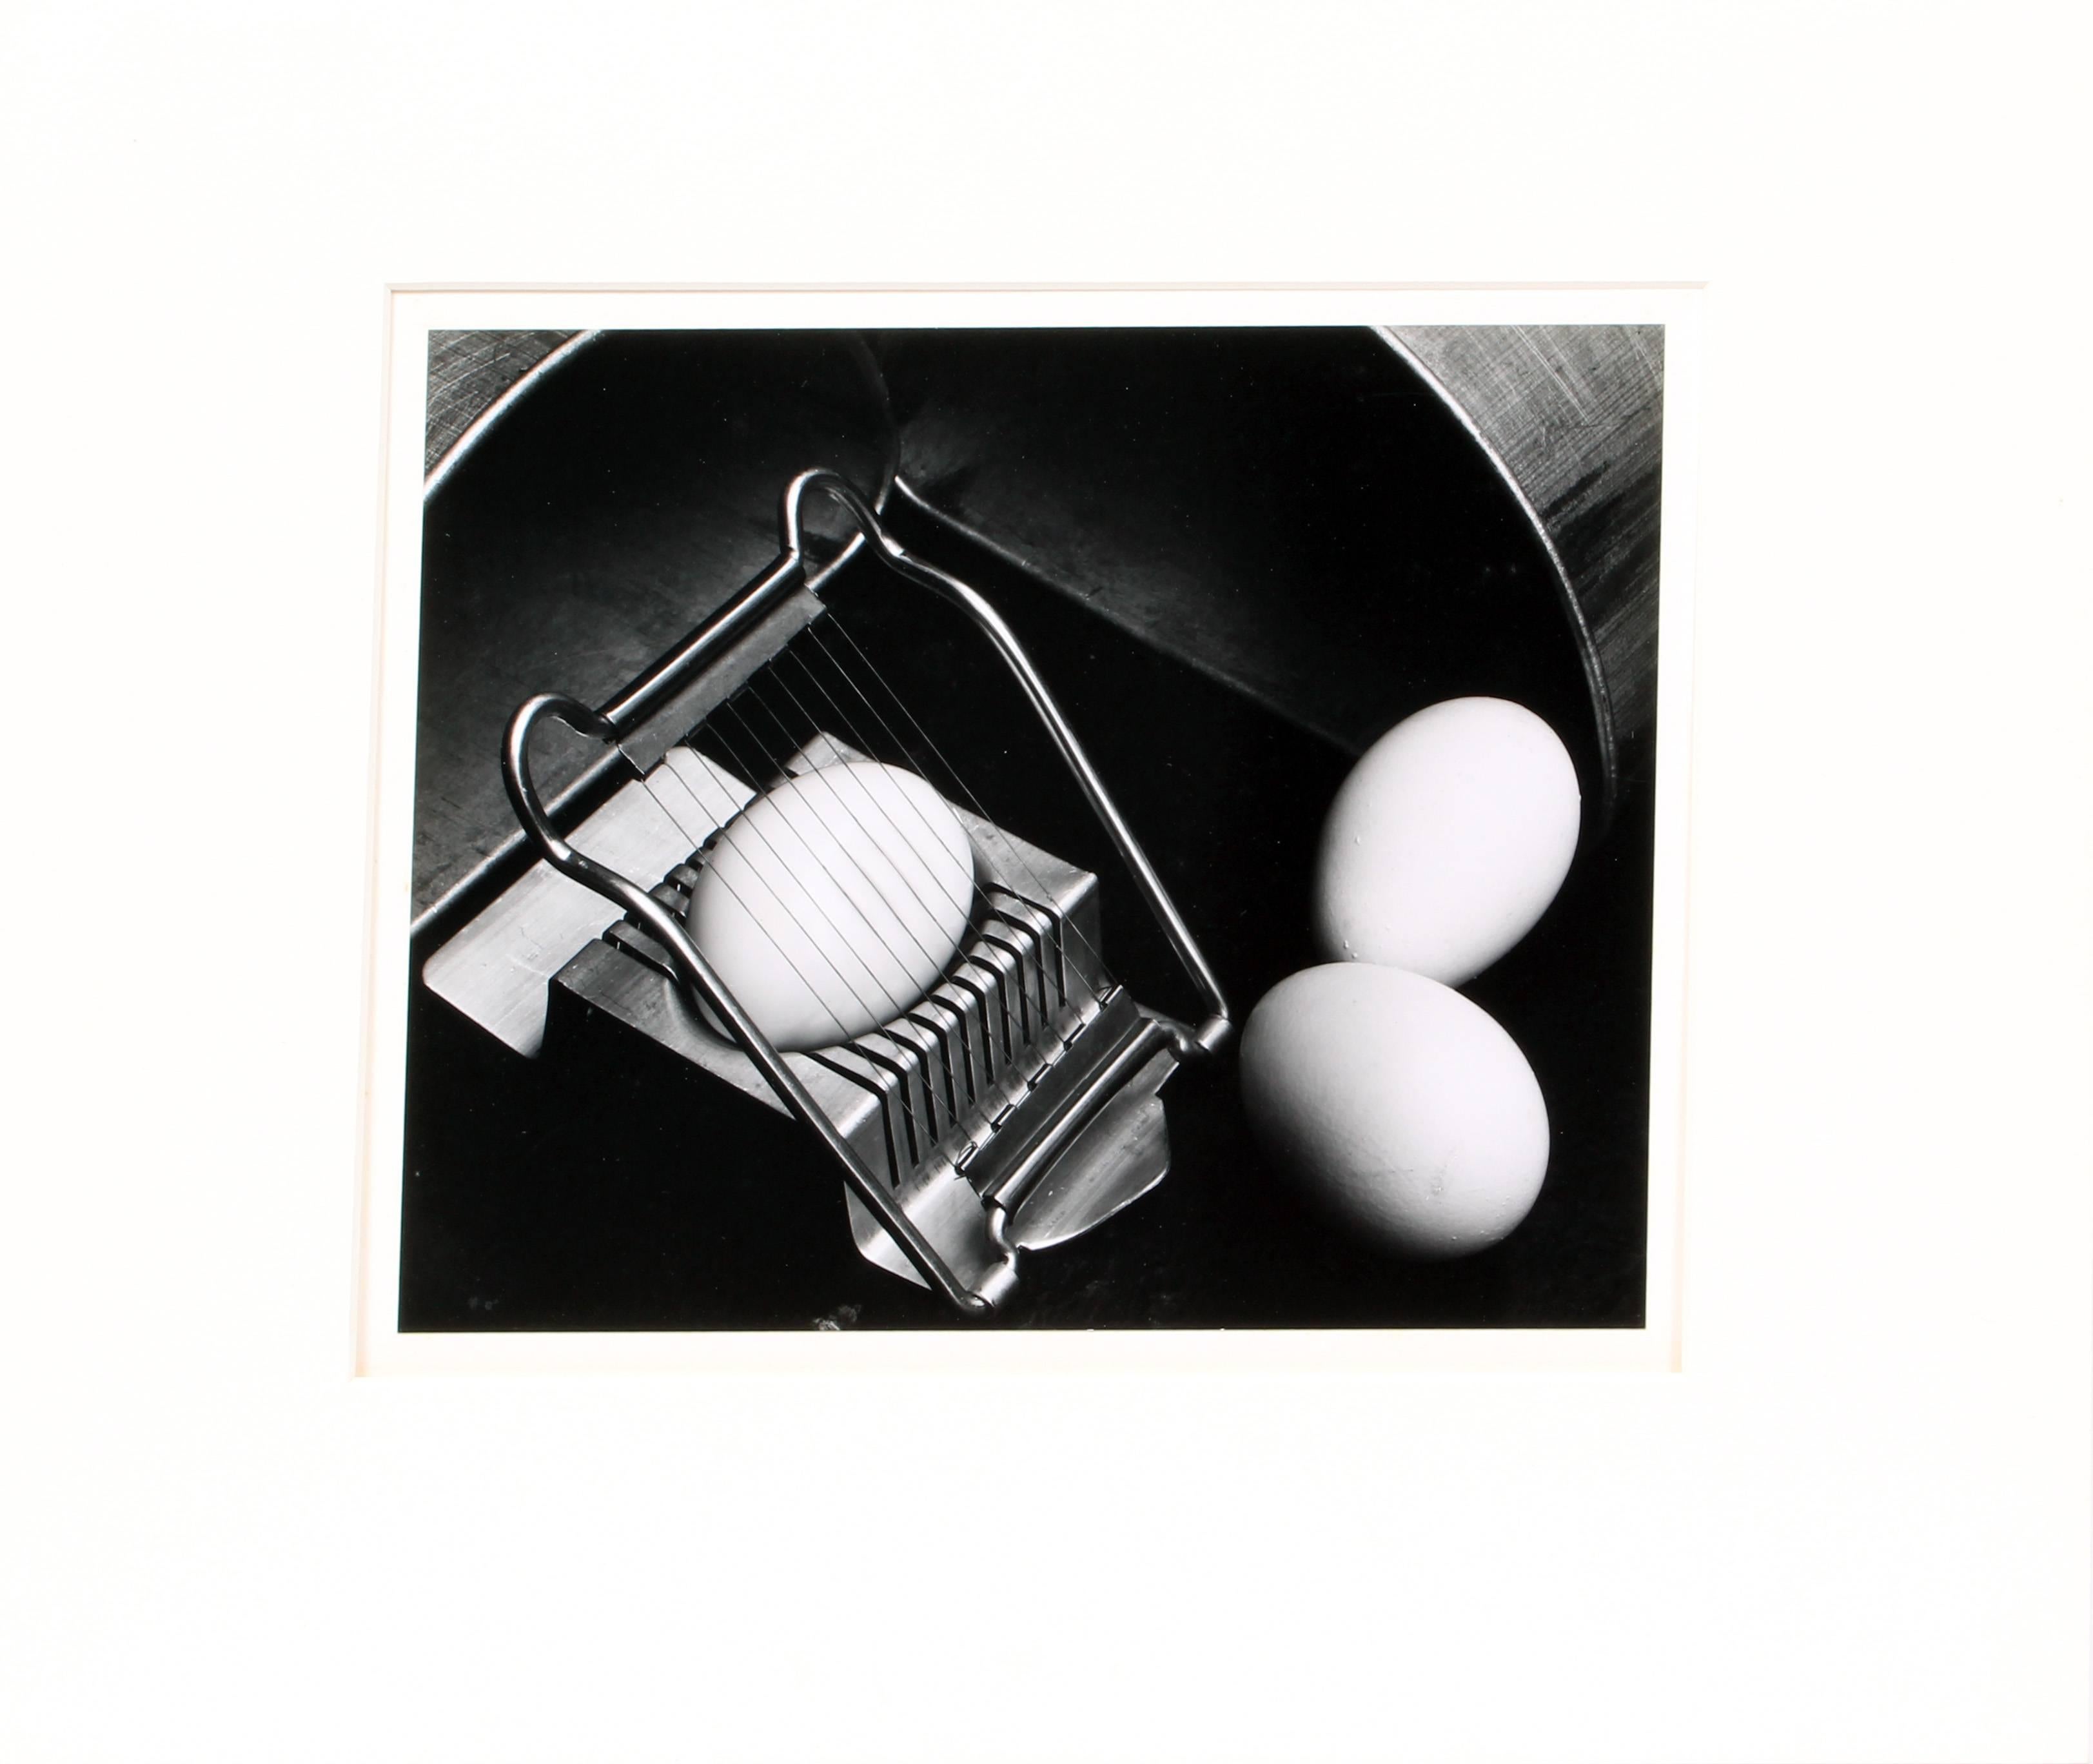 Eggs and Slicer - Photograph by Edward Weston